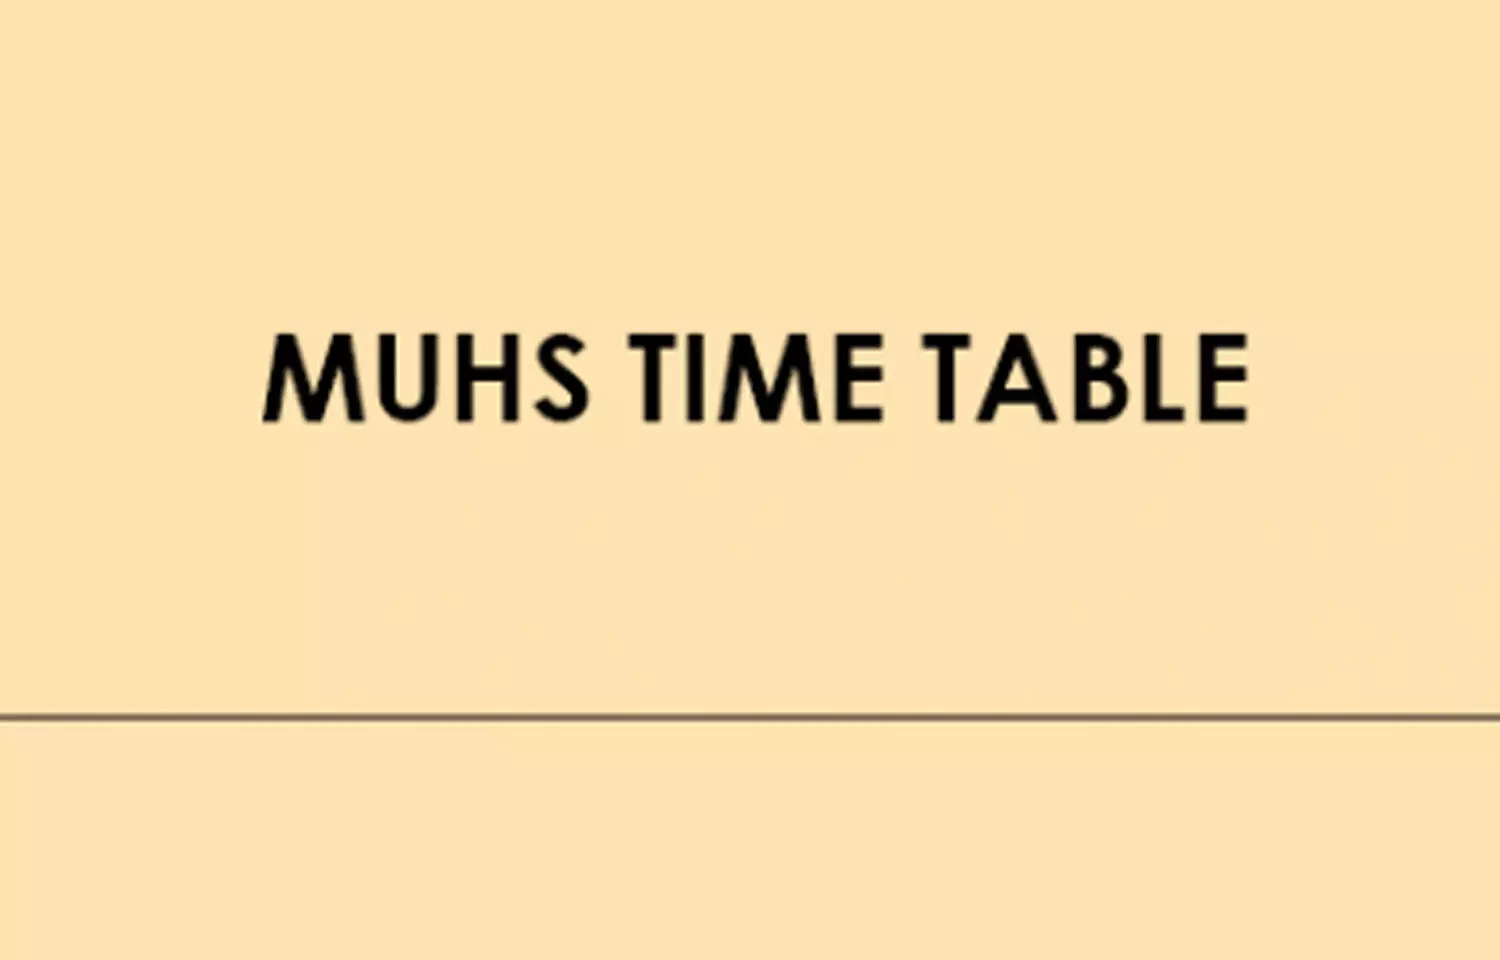 MUHS releases time table for MBBS, PG Ayurved, Unani Summer 2021 practical exams